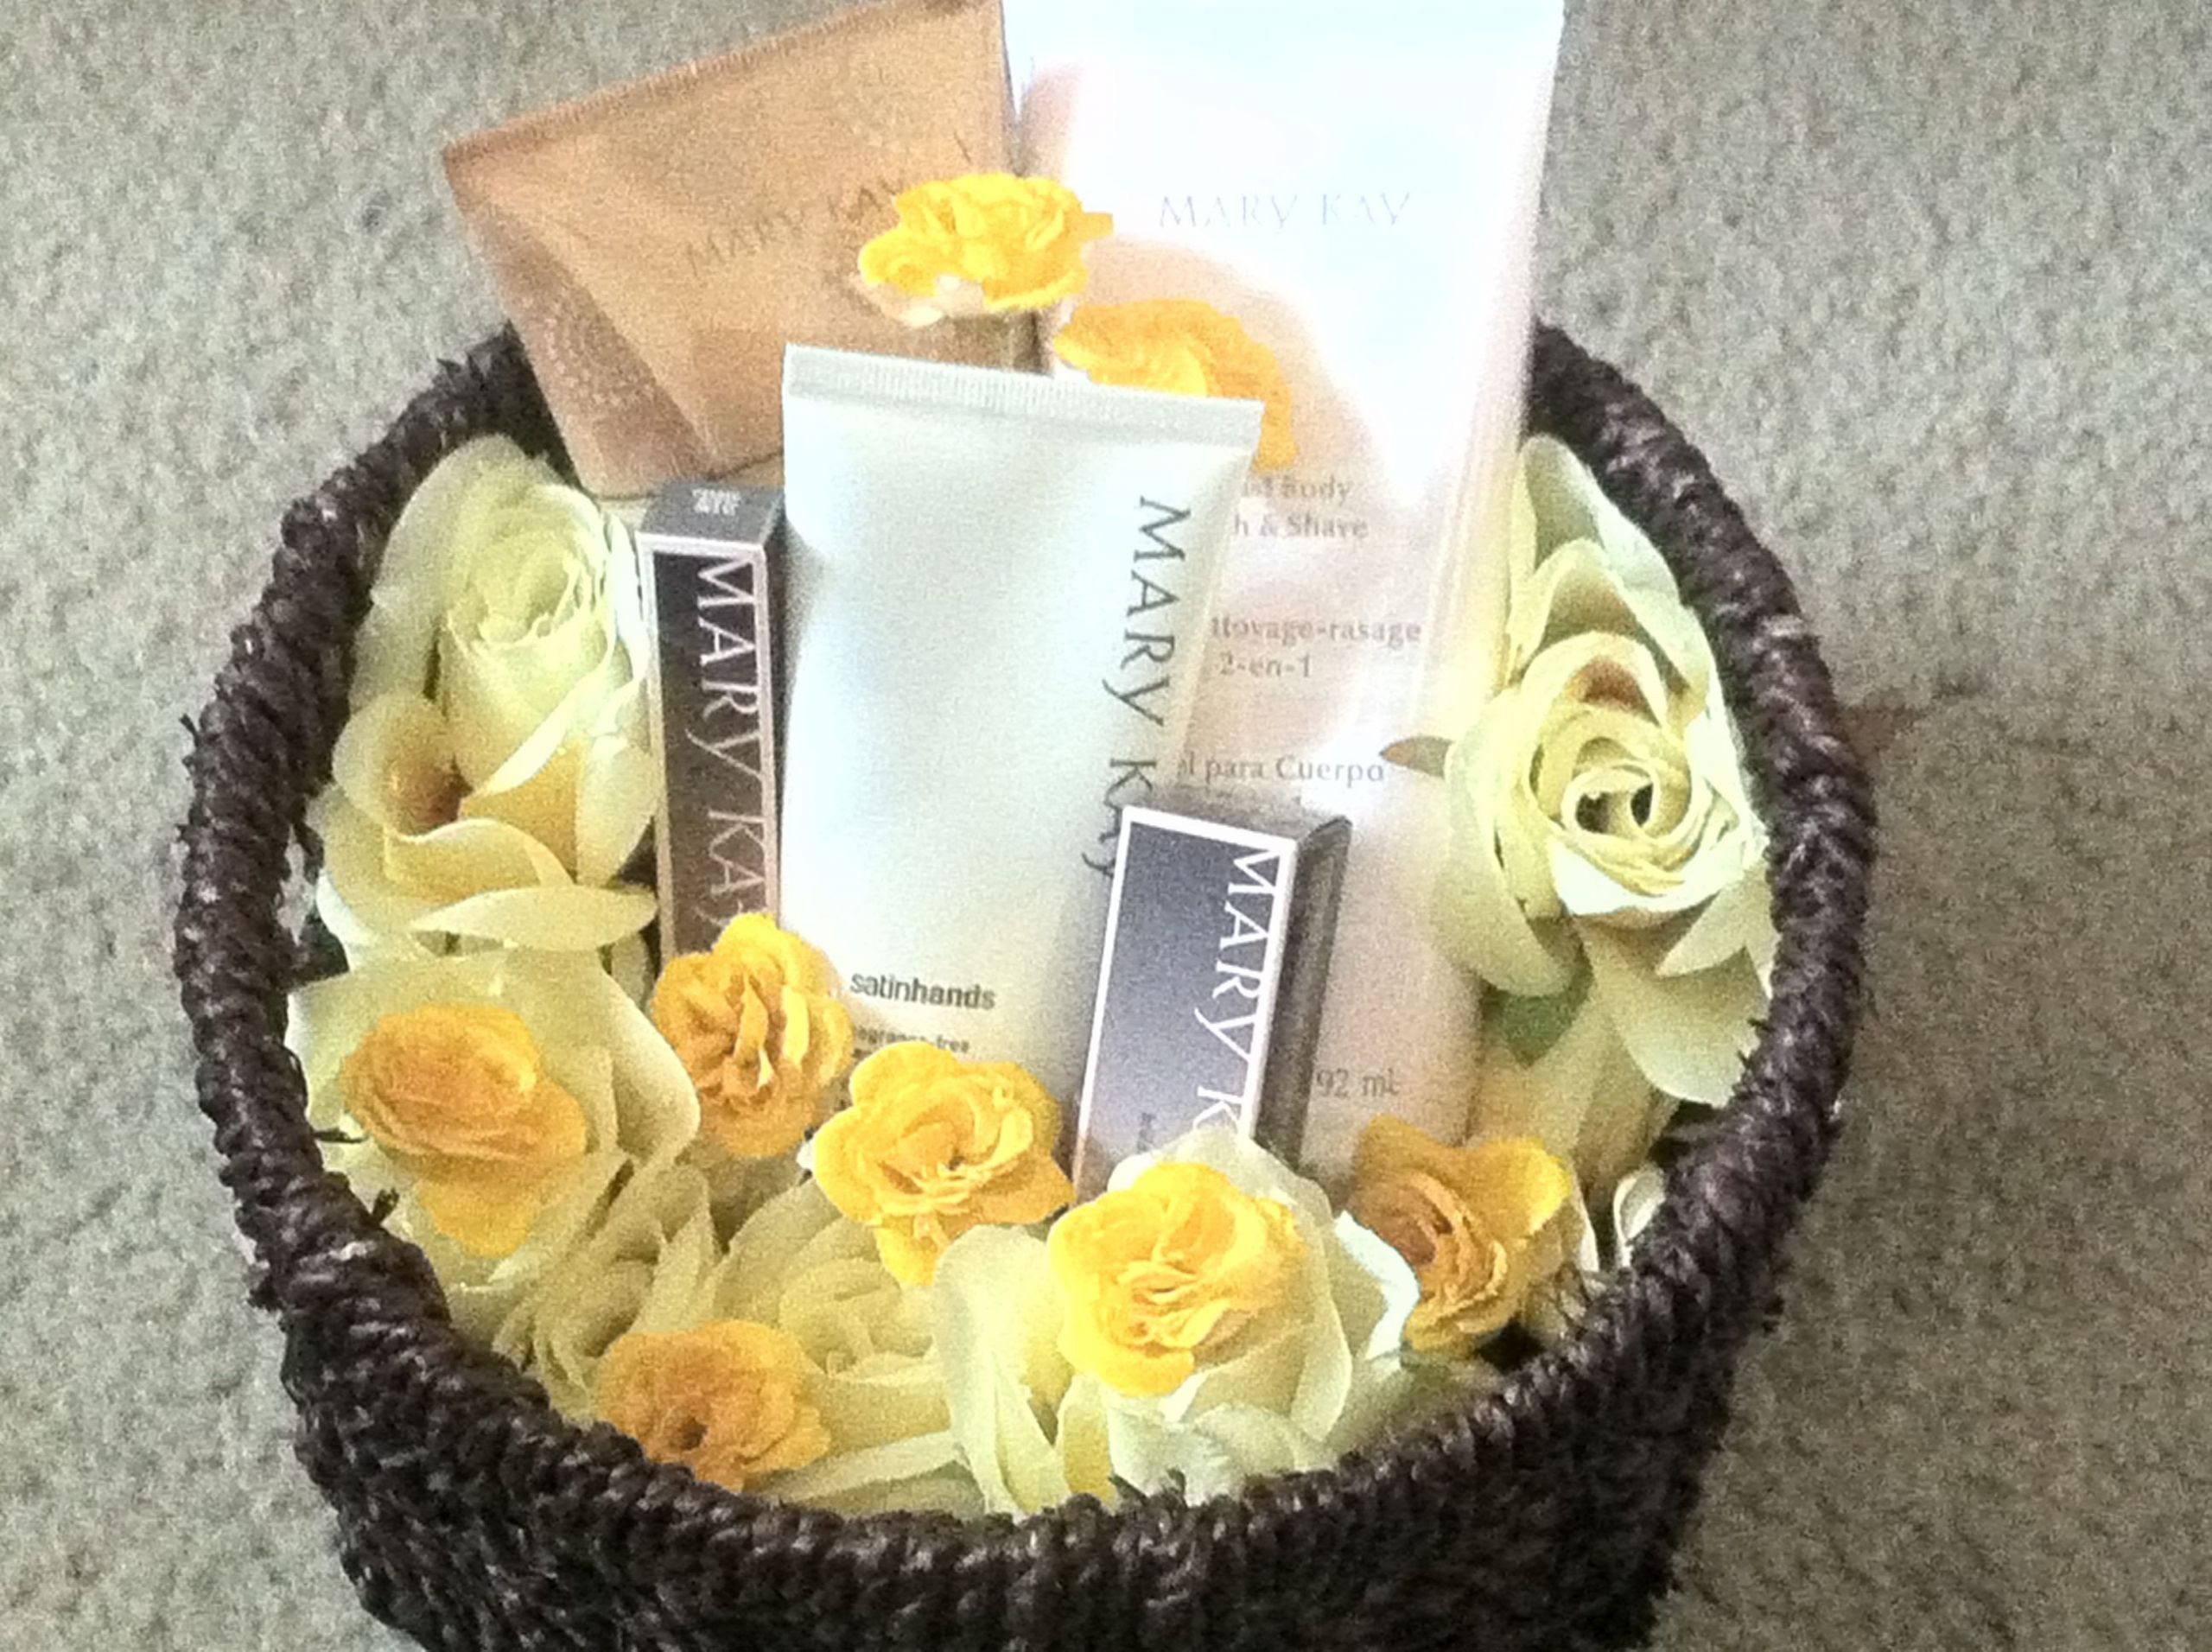 Mary Kay Gift Basket Ideas
 This is a Mothers Day Mary Kay basket I made for a client